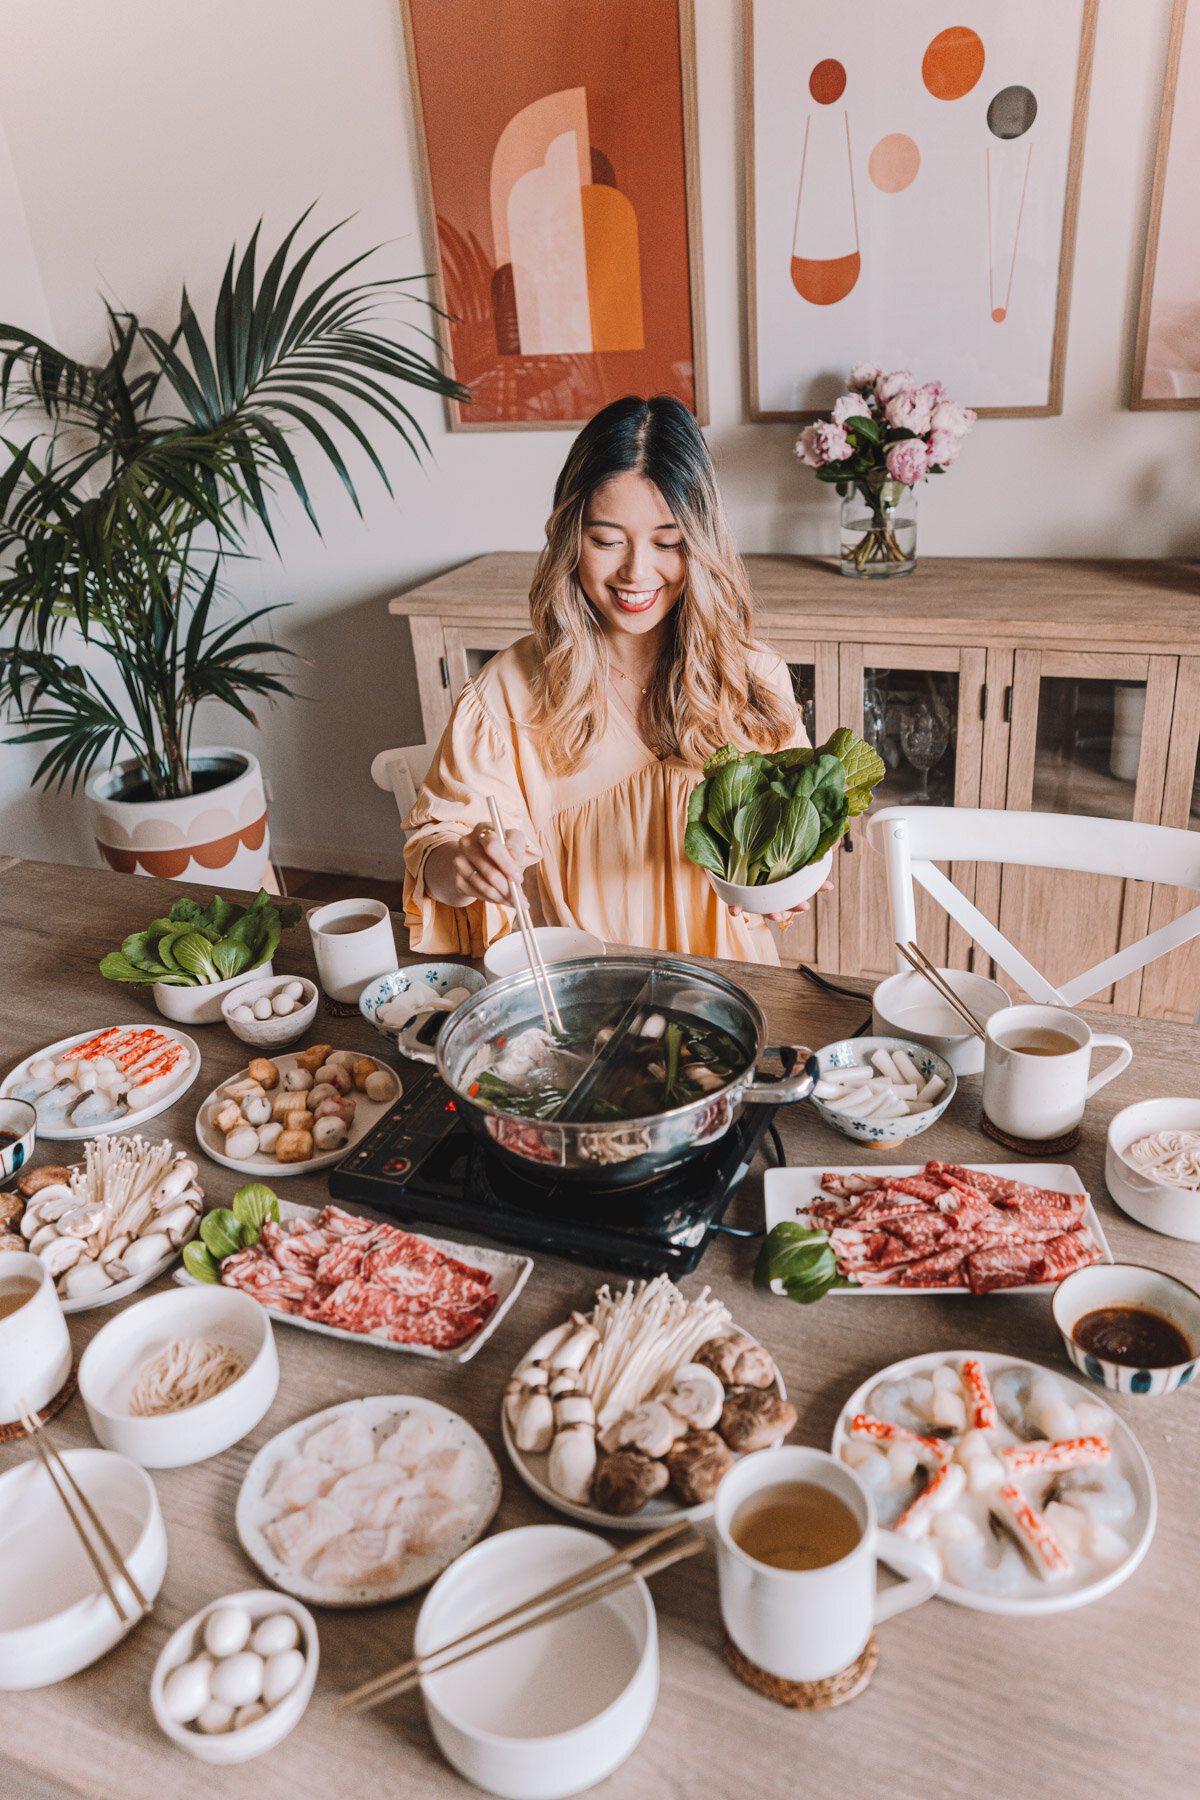 Home style hot pot dining